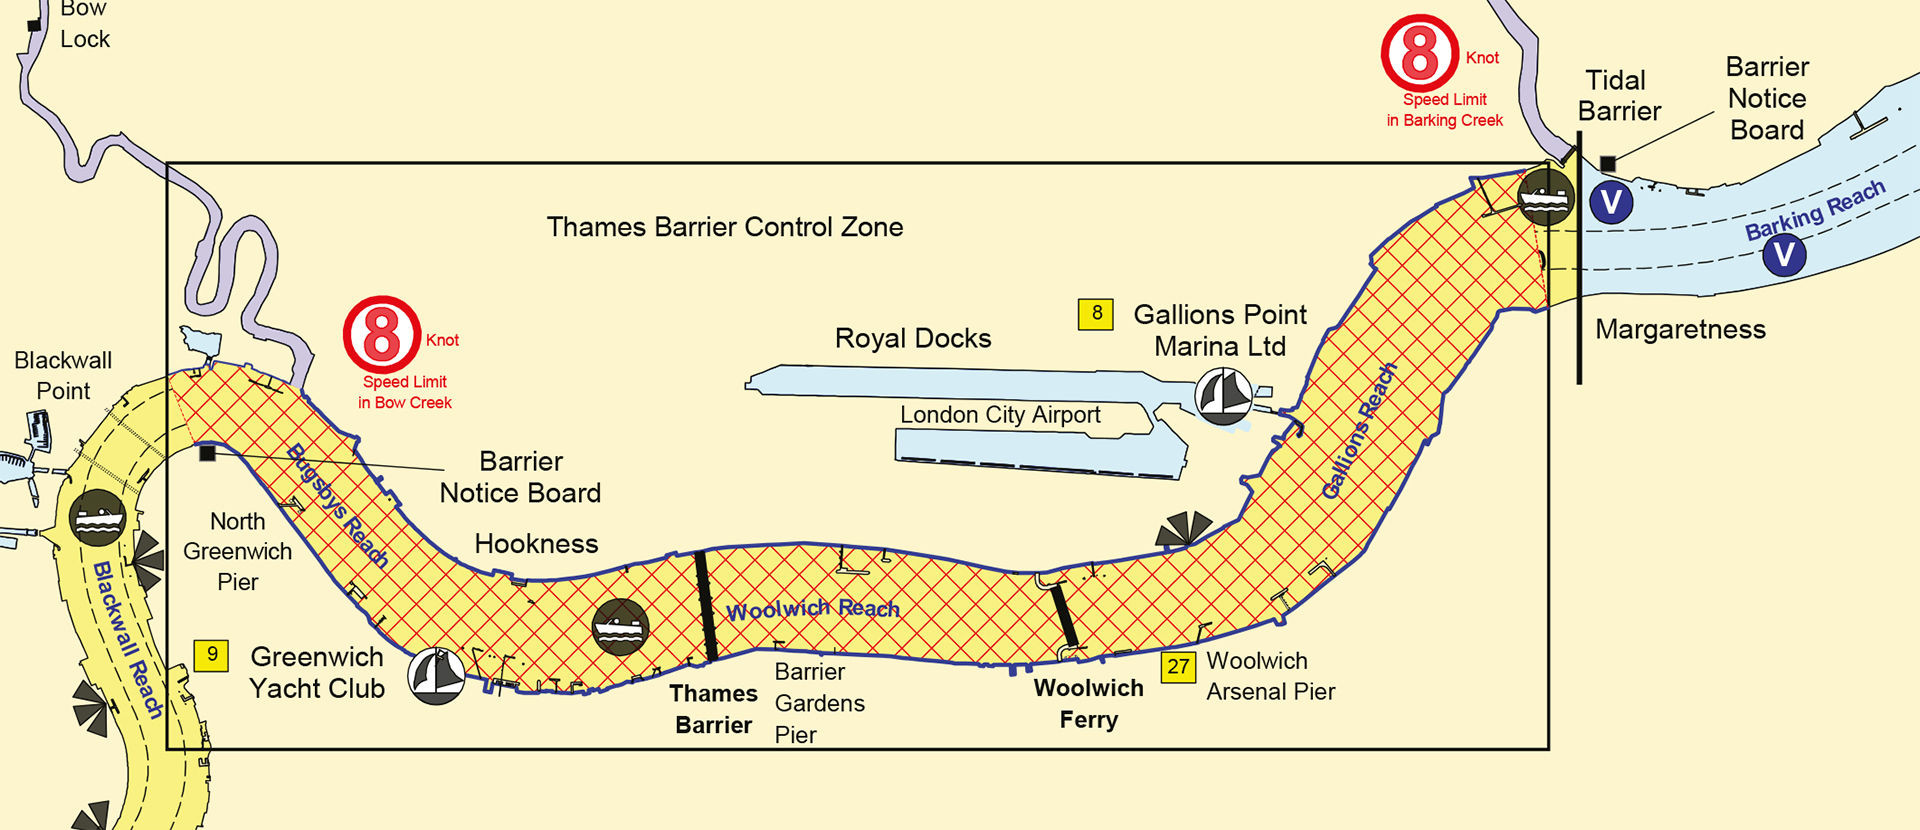 Illustration showing the Thames Barrier control zone